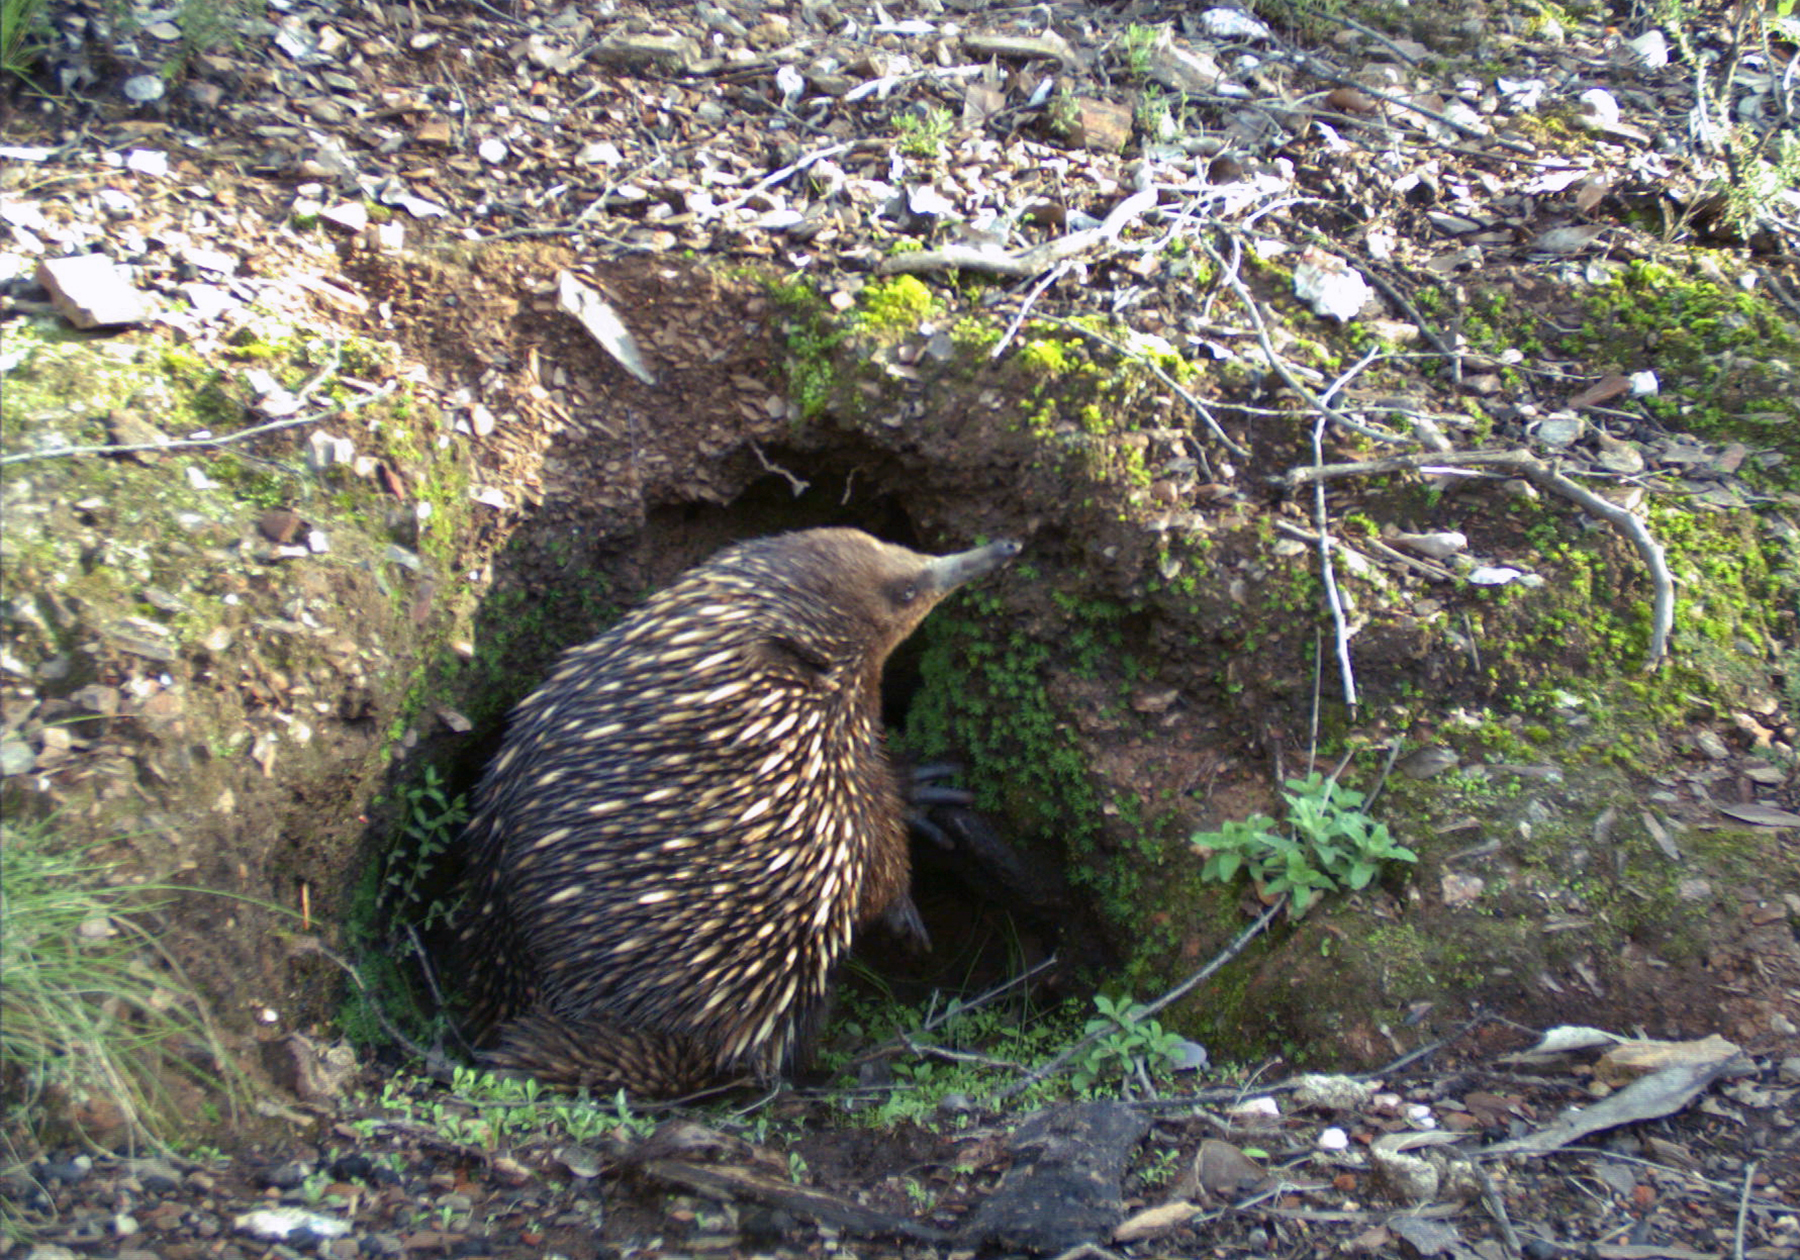 Image for article: Wombat burrows provide refuge from fires